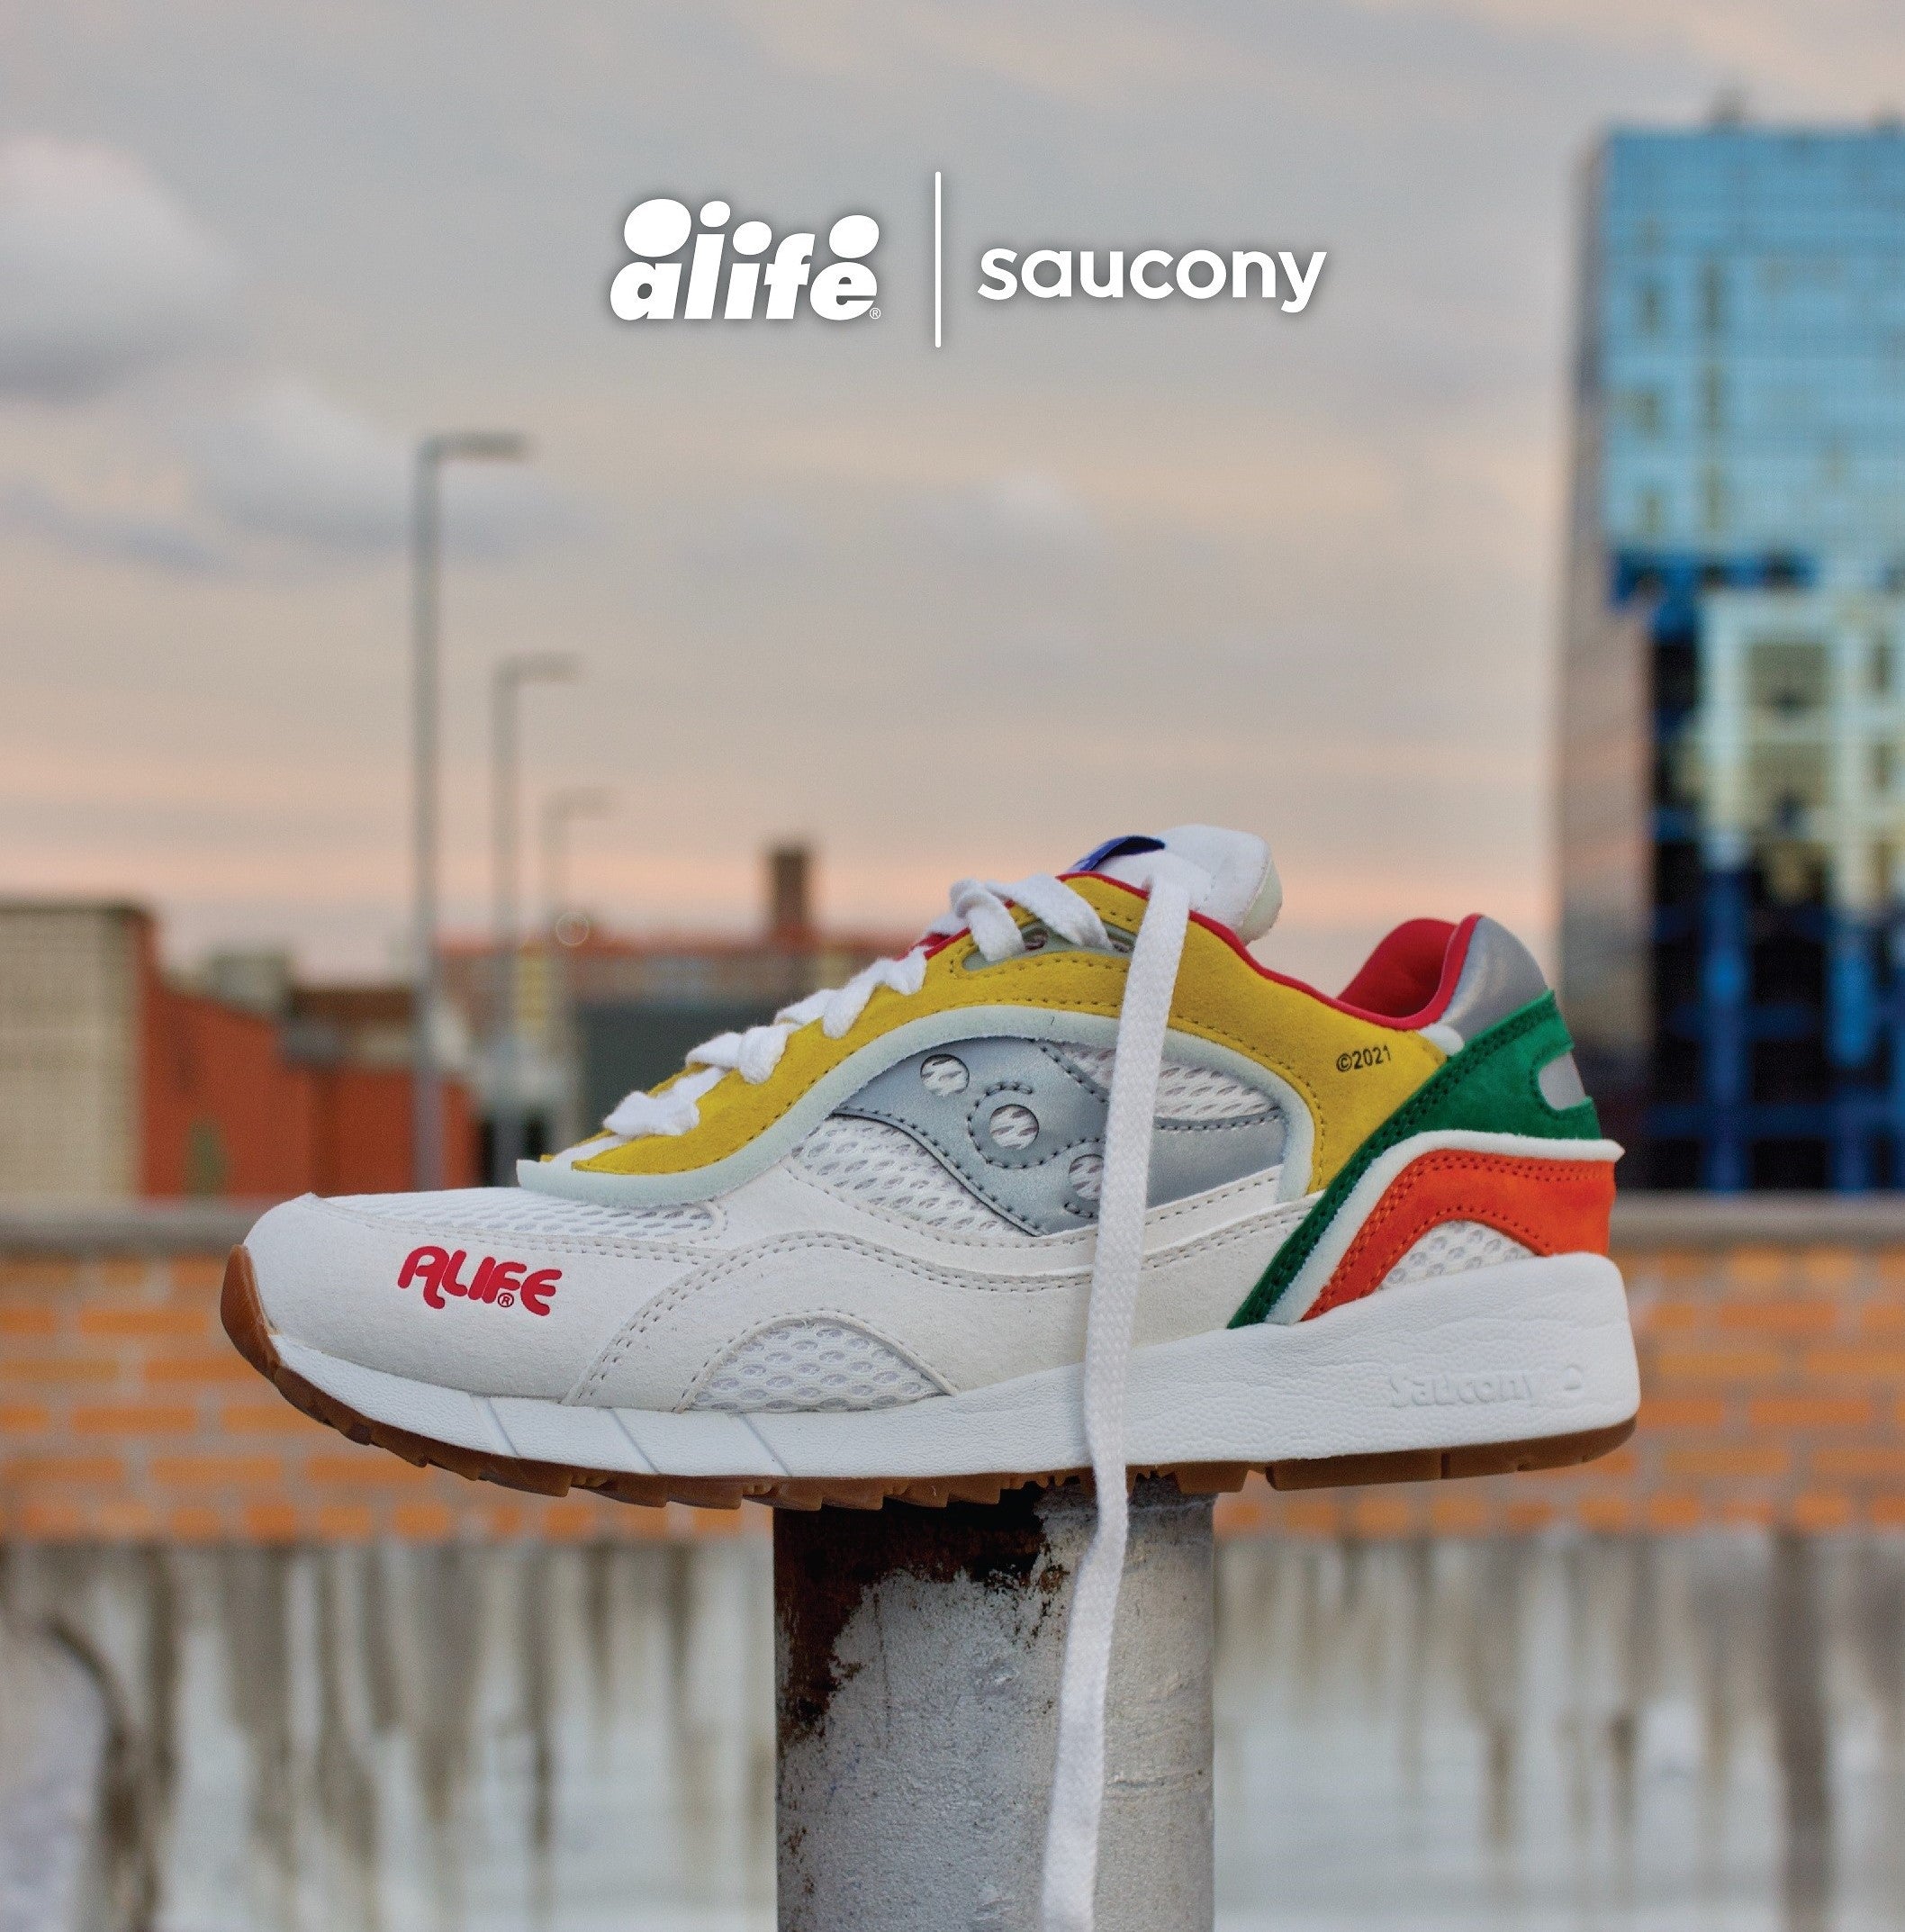 ALIFE x Saucony Alife - a Shadow classic. makes 6000